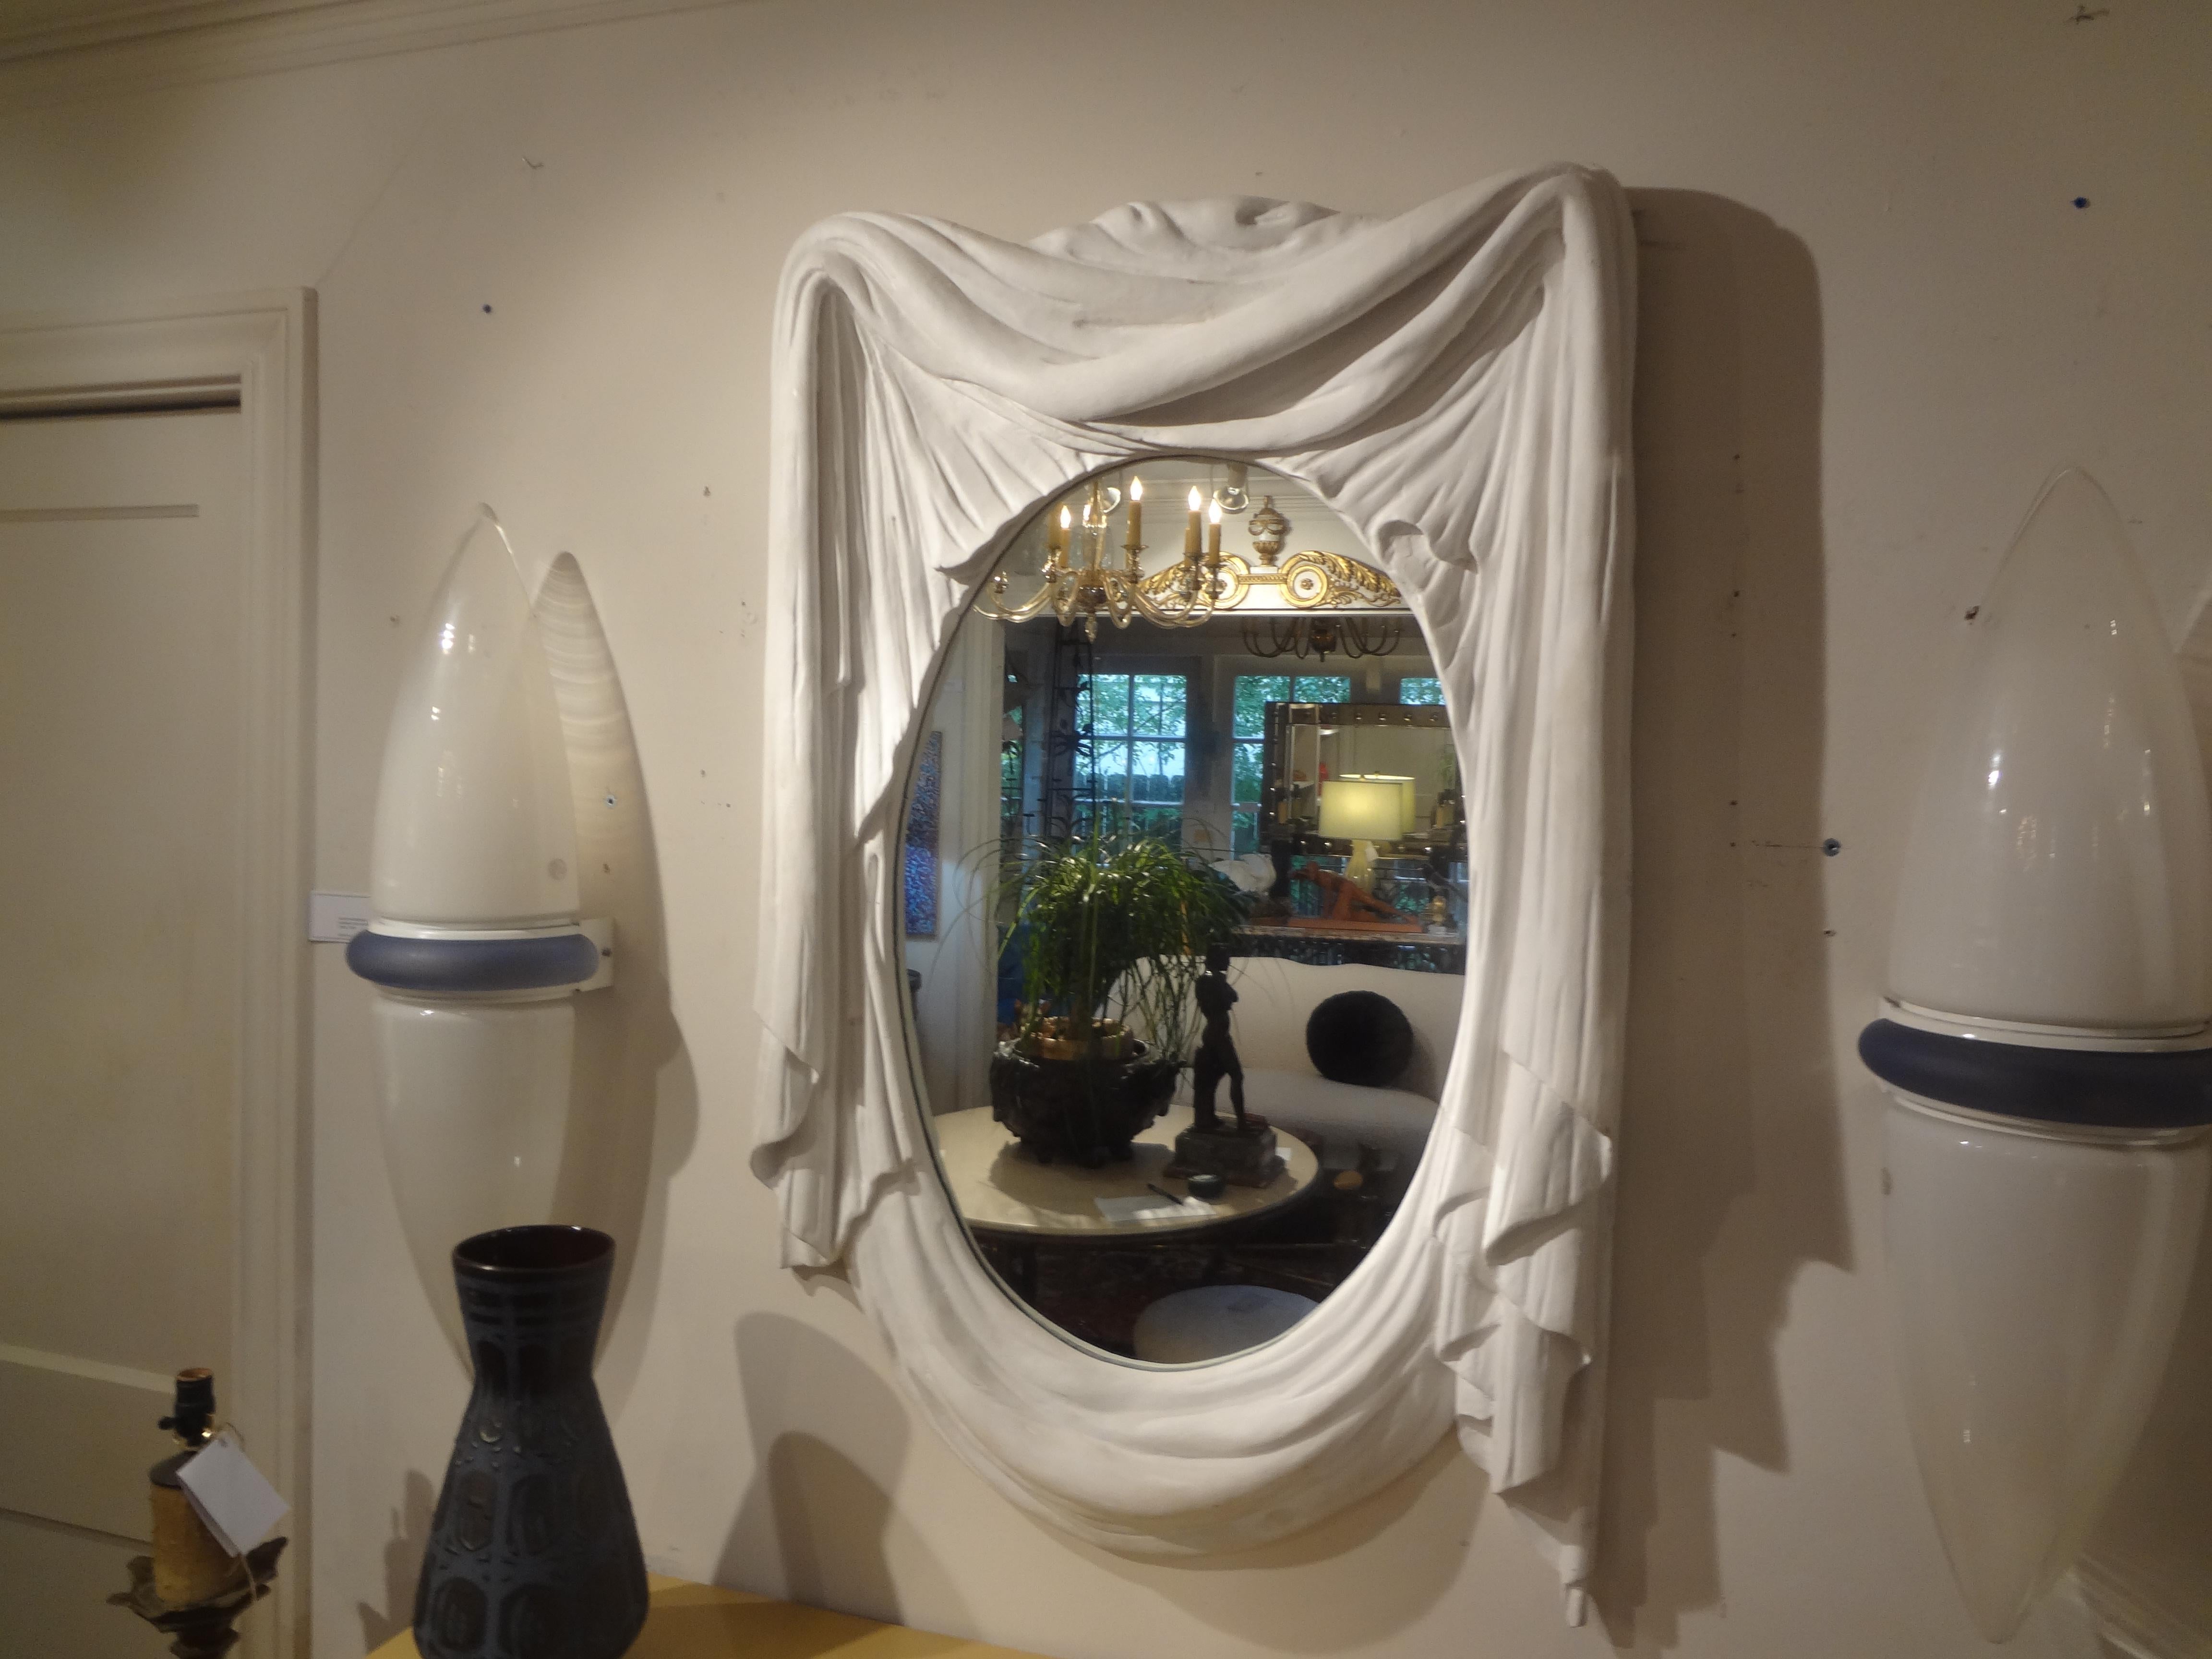 French Modern Plaster Draped Mirror in the Manner of Serge Roche.
This outstanding French plaster mirror has a beautiful asymmetrical draped or swag design with a central oval mirror plate. 
This stunning Parisian style French plaster mirror is in